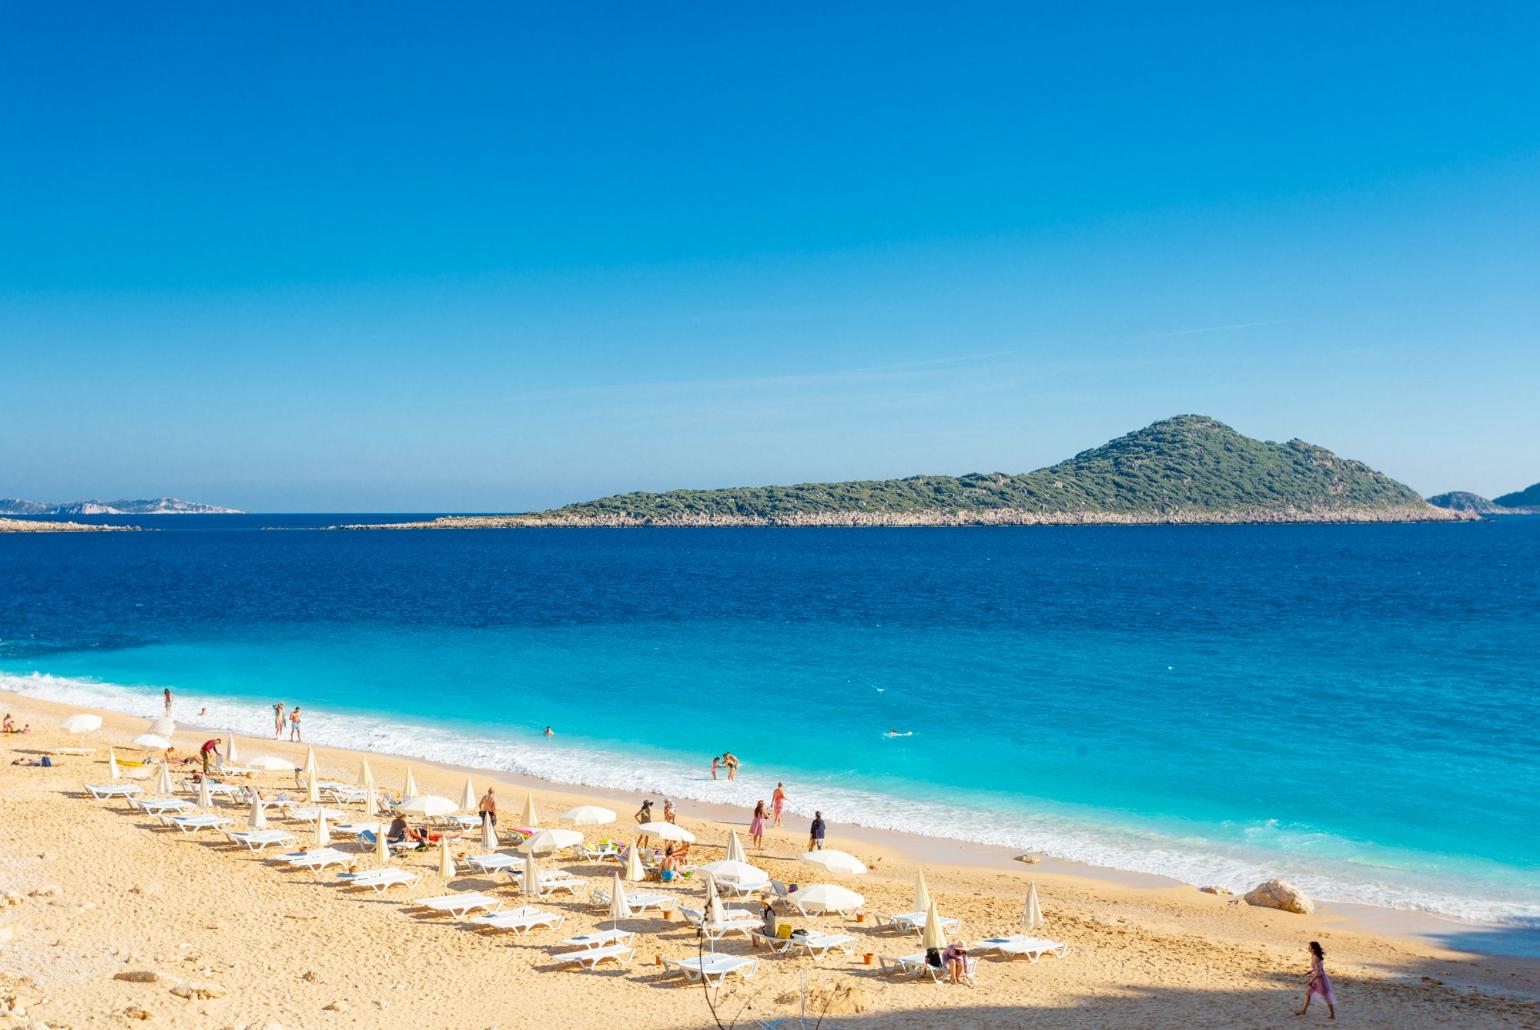 Kaputas Beach - on the finest beaches in Turkey, and only a short drive from Villa Arykanoos